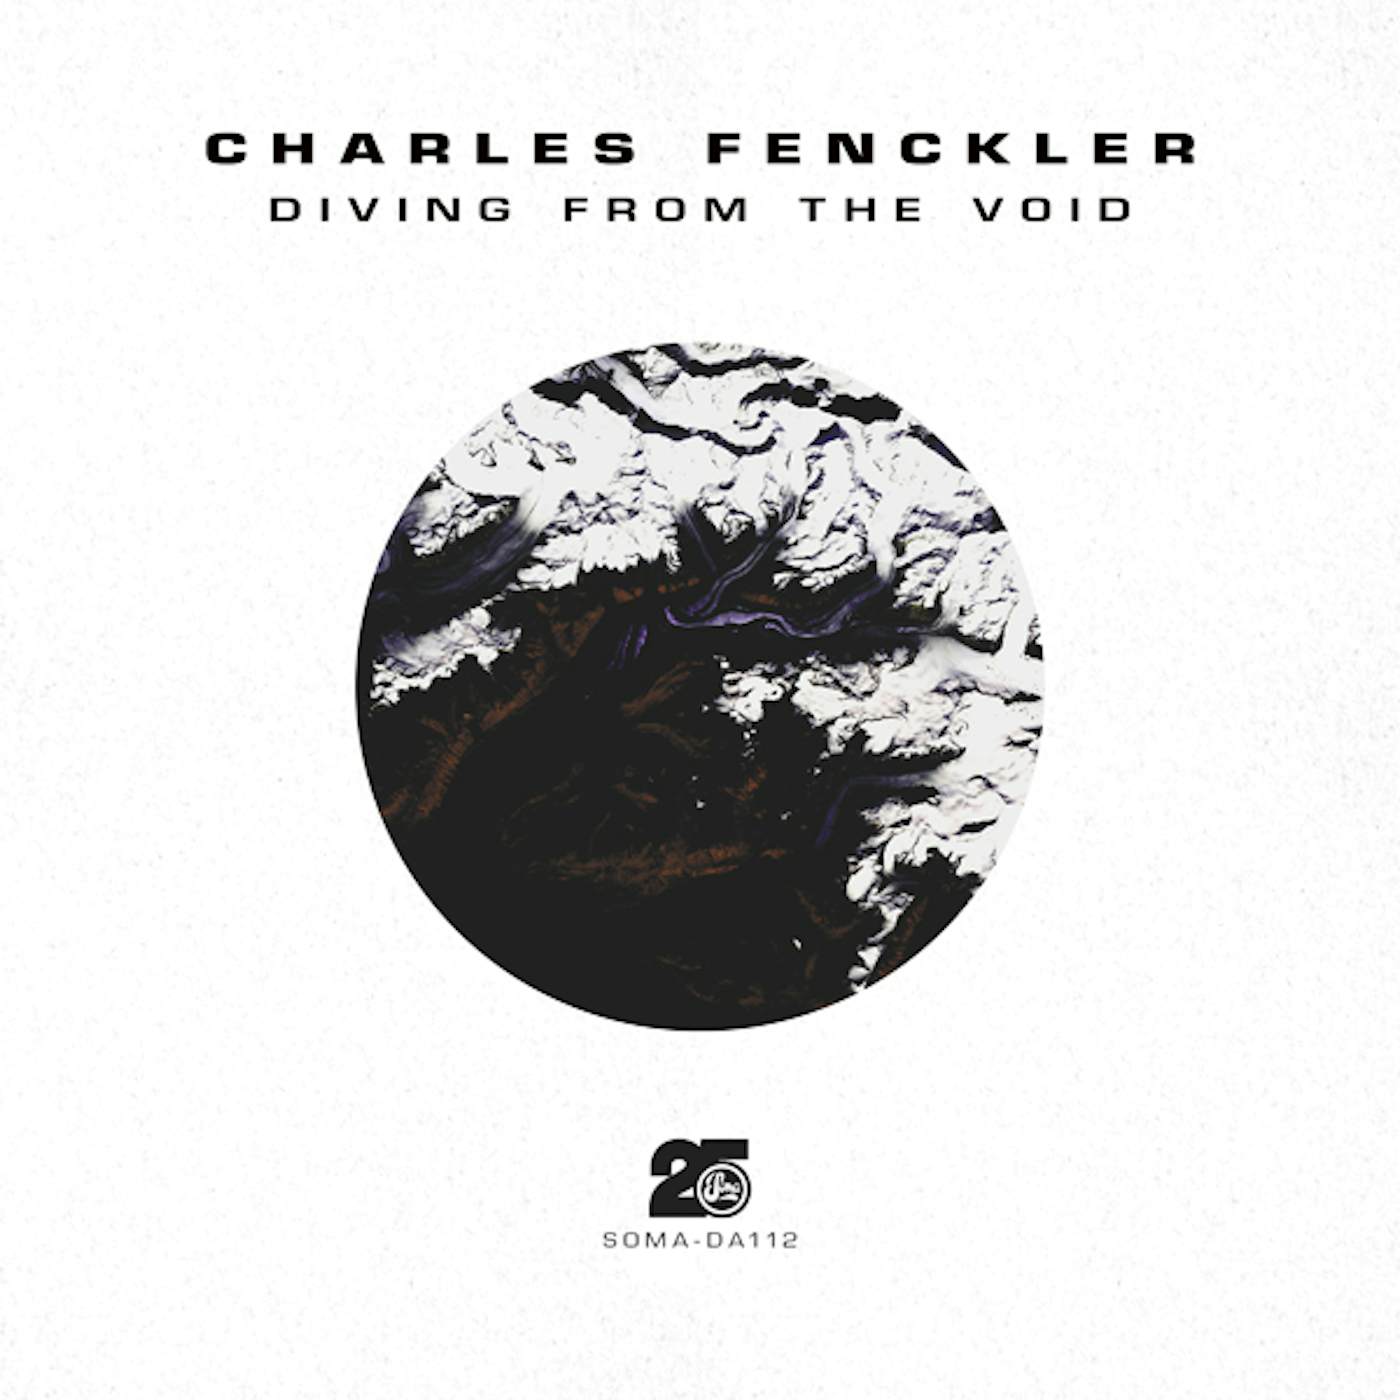 Charles Fenckler DIVING FROM THE VOID CD